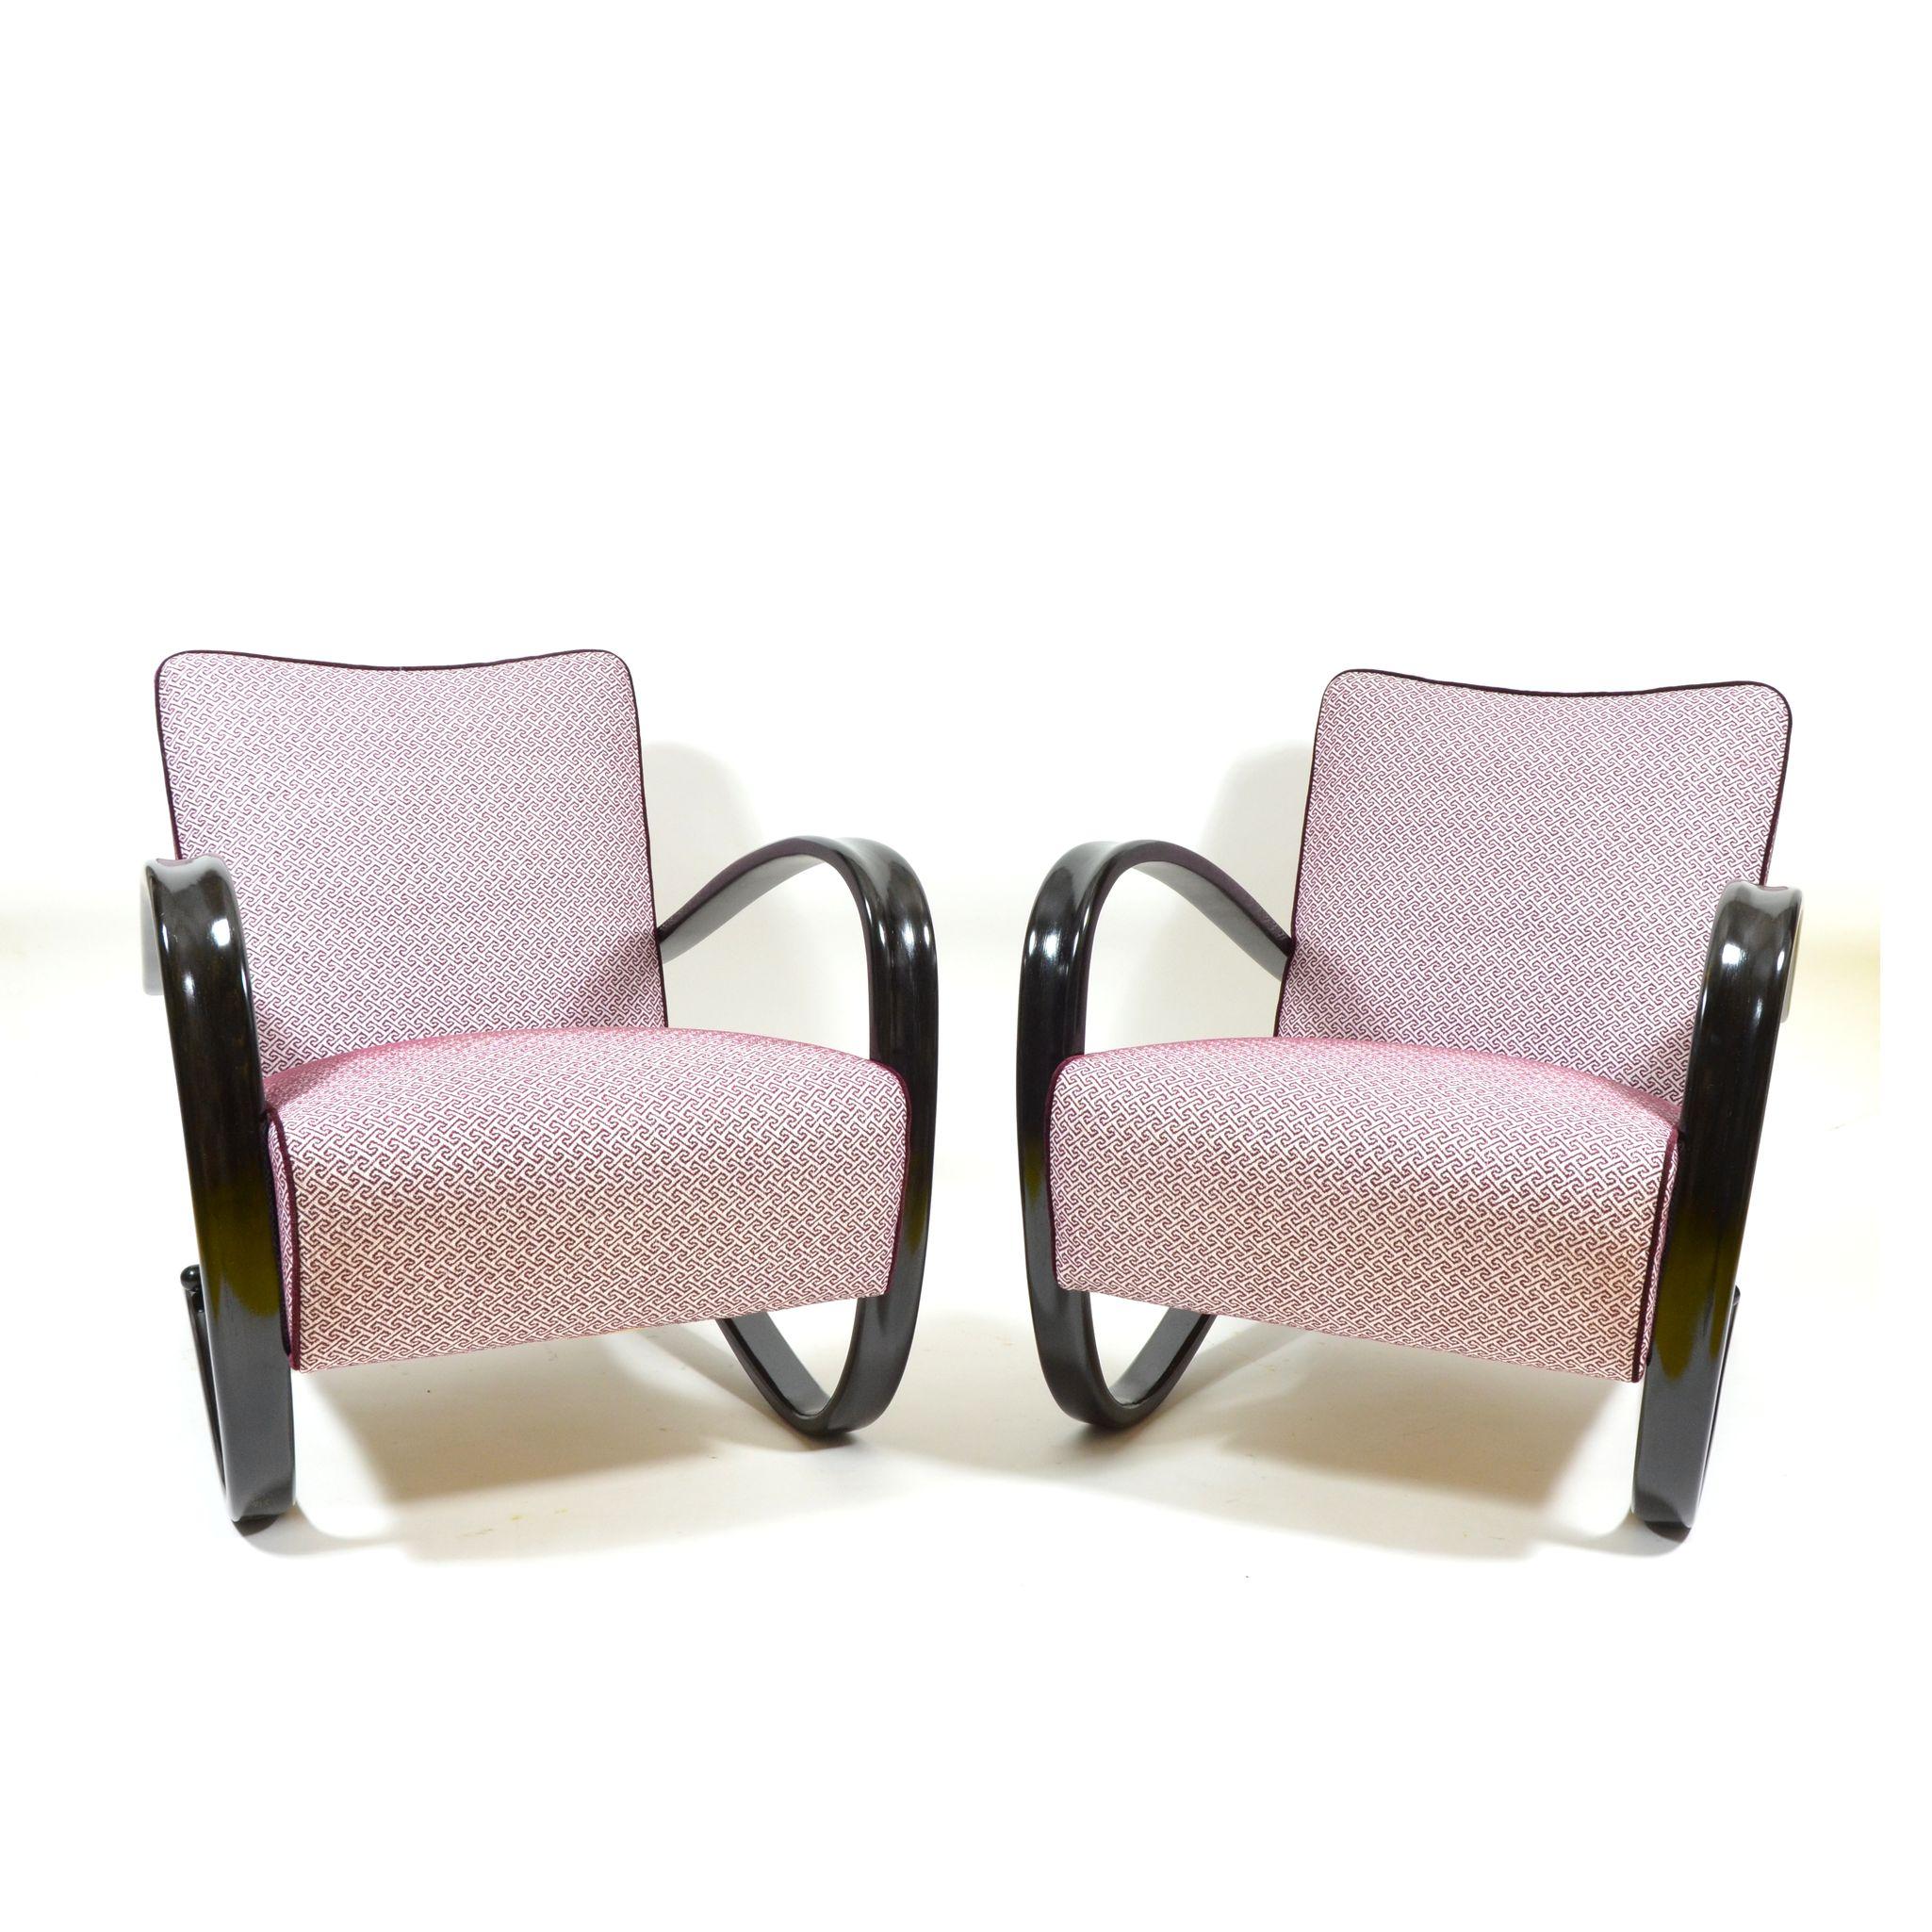 A pair of completely restored armchairs designed in the 1930s by famous Czechoslovak architect Jindrich Halabala. Armchairs were produced in former Czechoslovakia during 1930s-1950s by Thonet. Armchairs have new upholstery fabric and completely